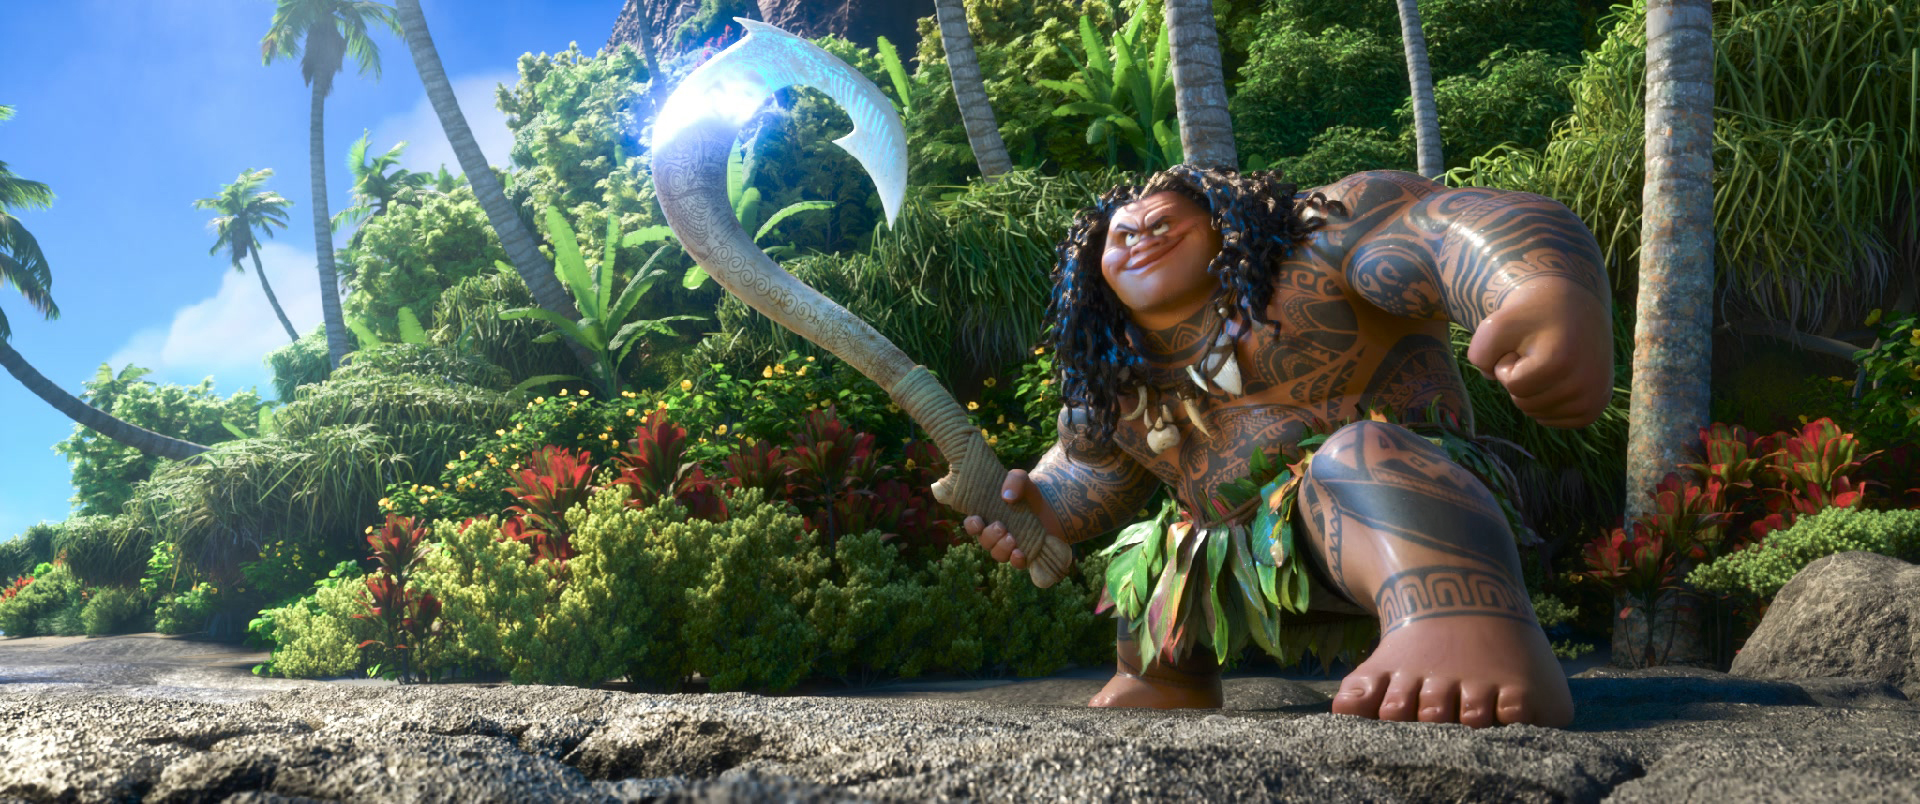 Moana’s You’re Welcome Clip Released